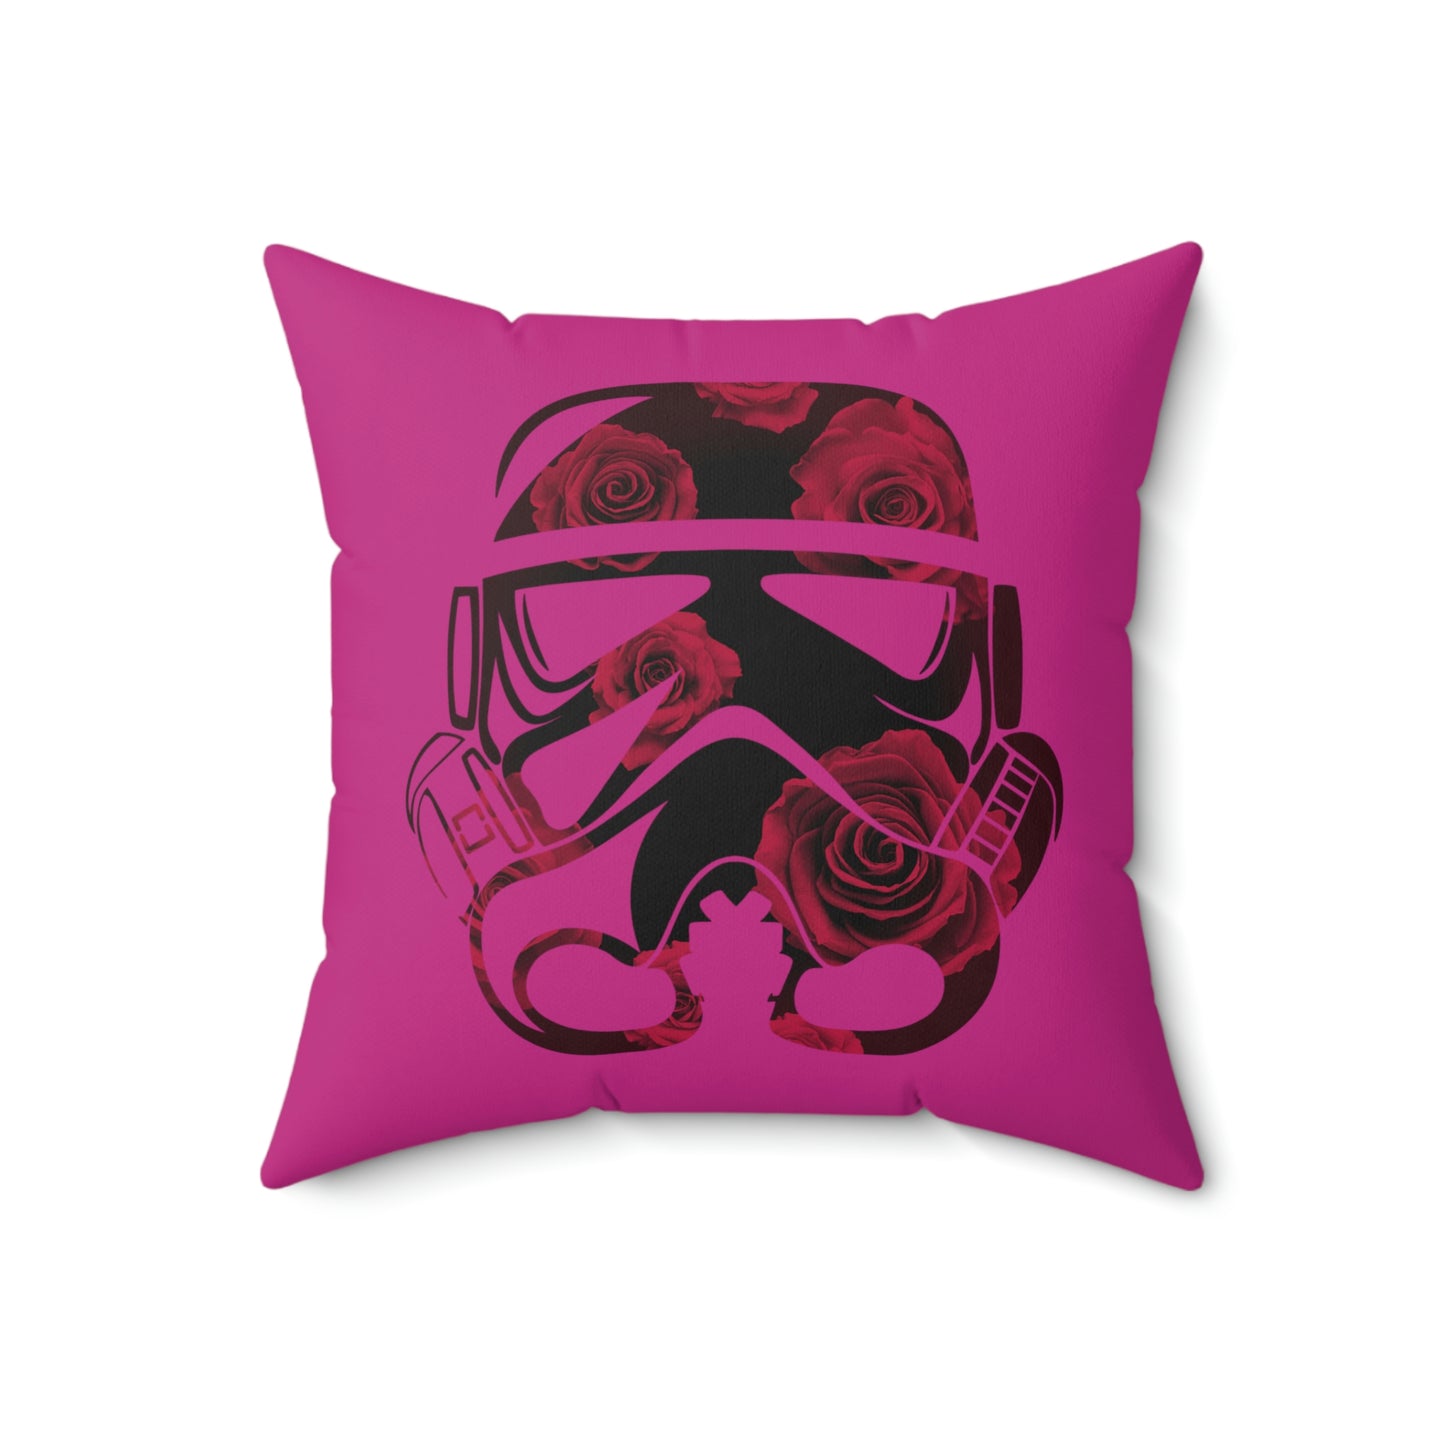 Spun Polyester Square Pillow Case ”Storm Trooper 15 on Pink”